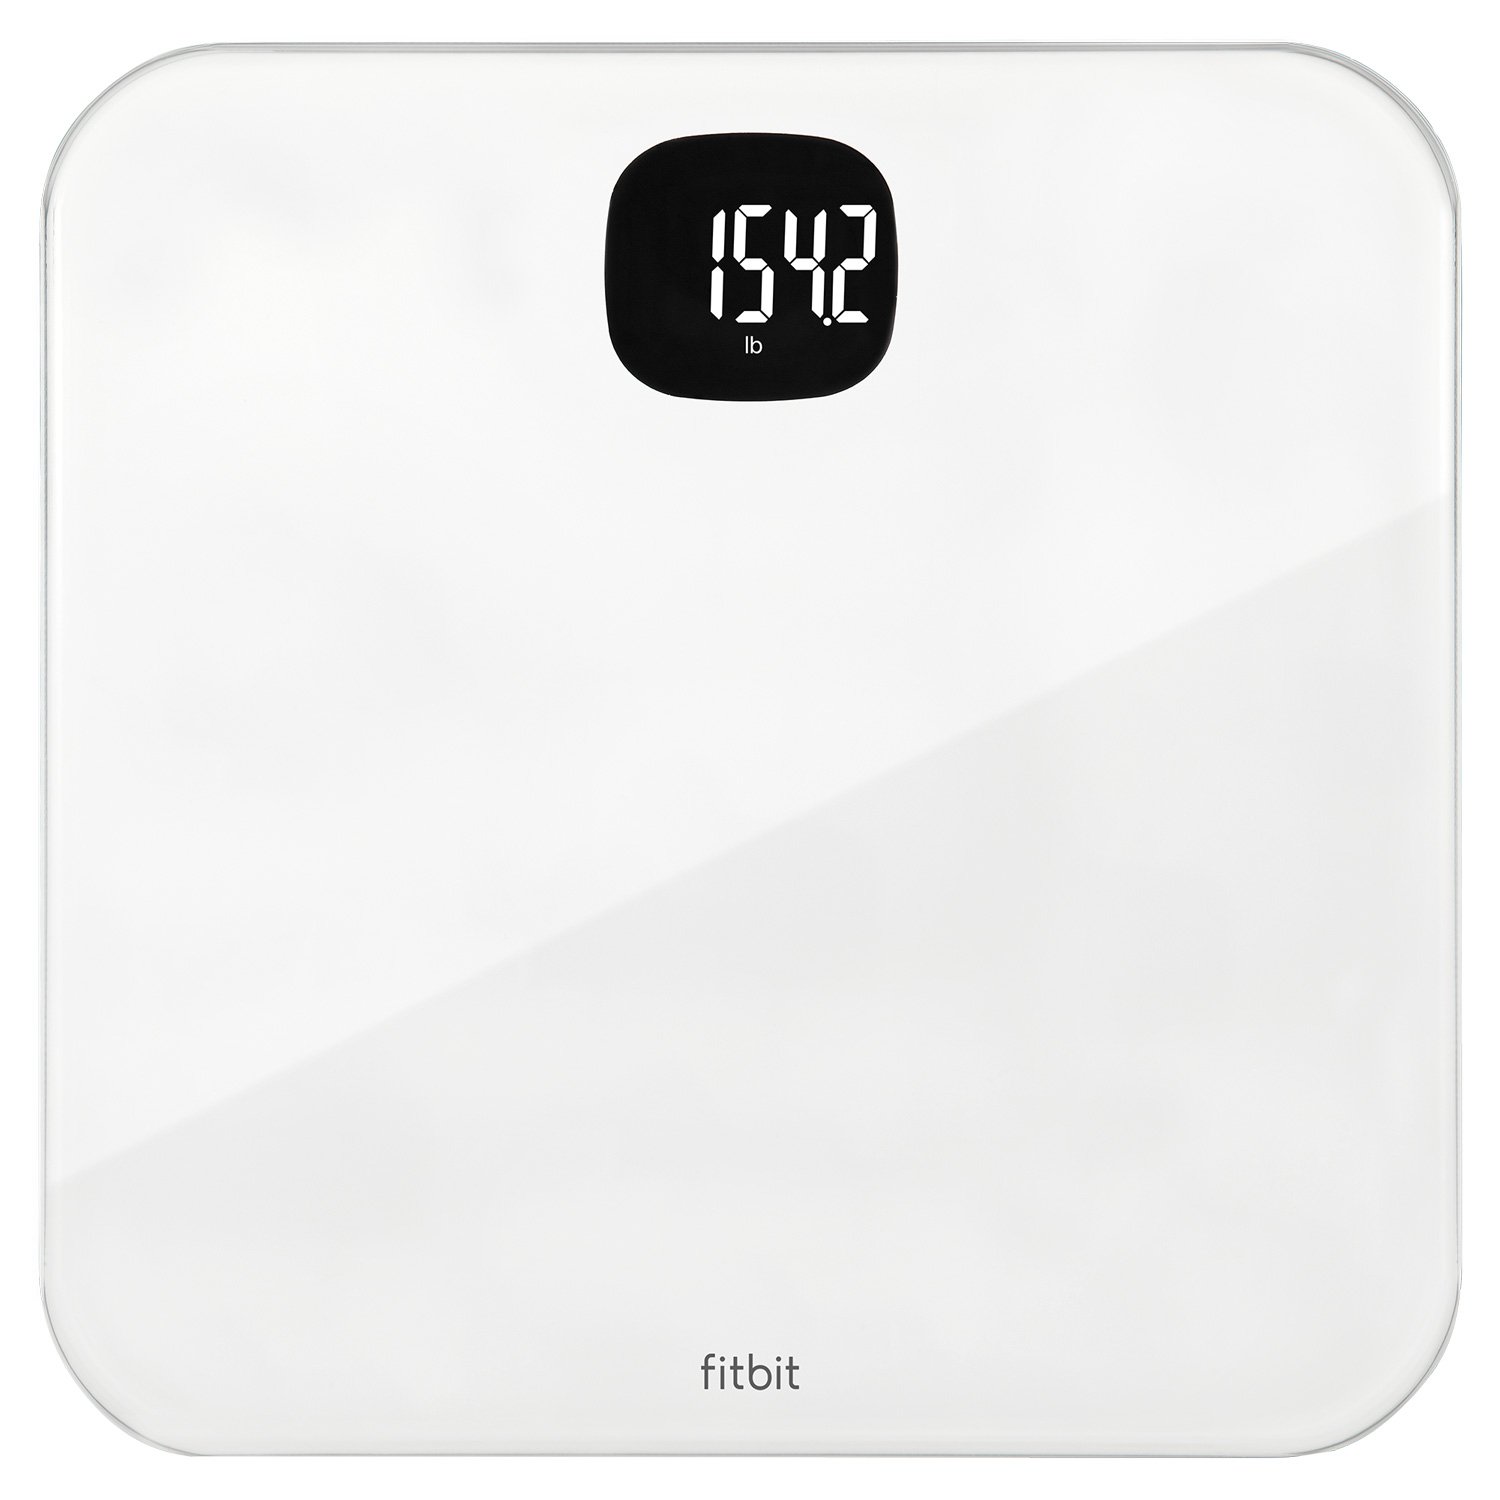 fitbit scale